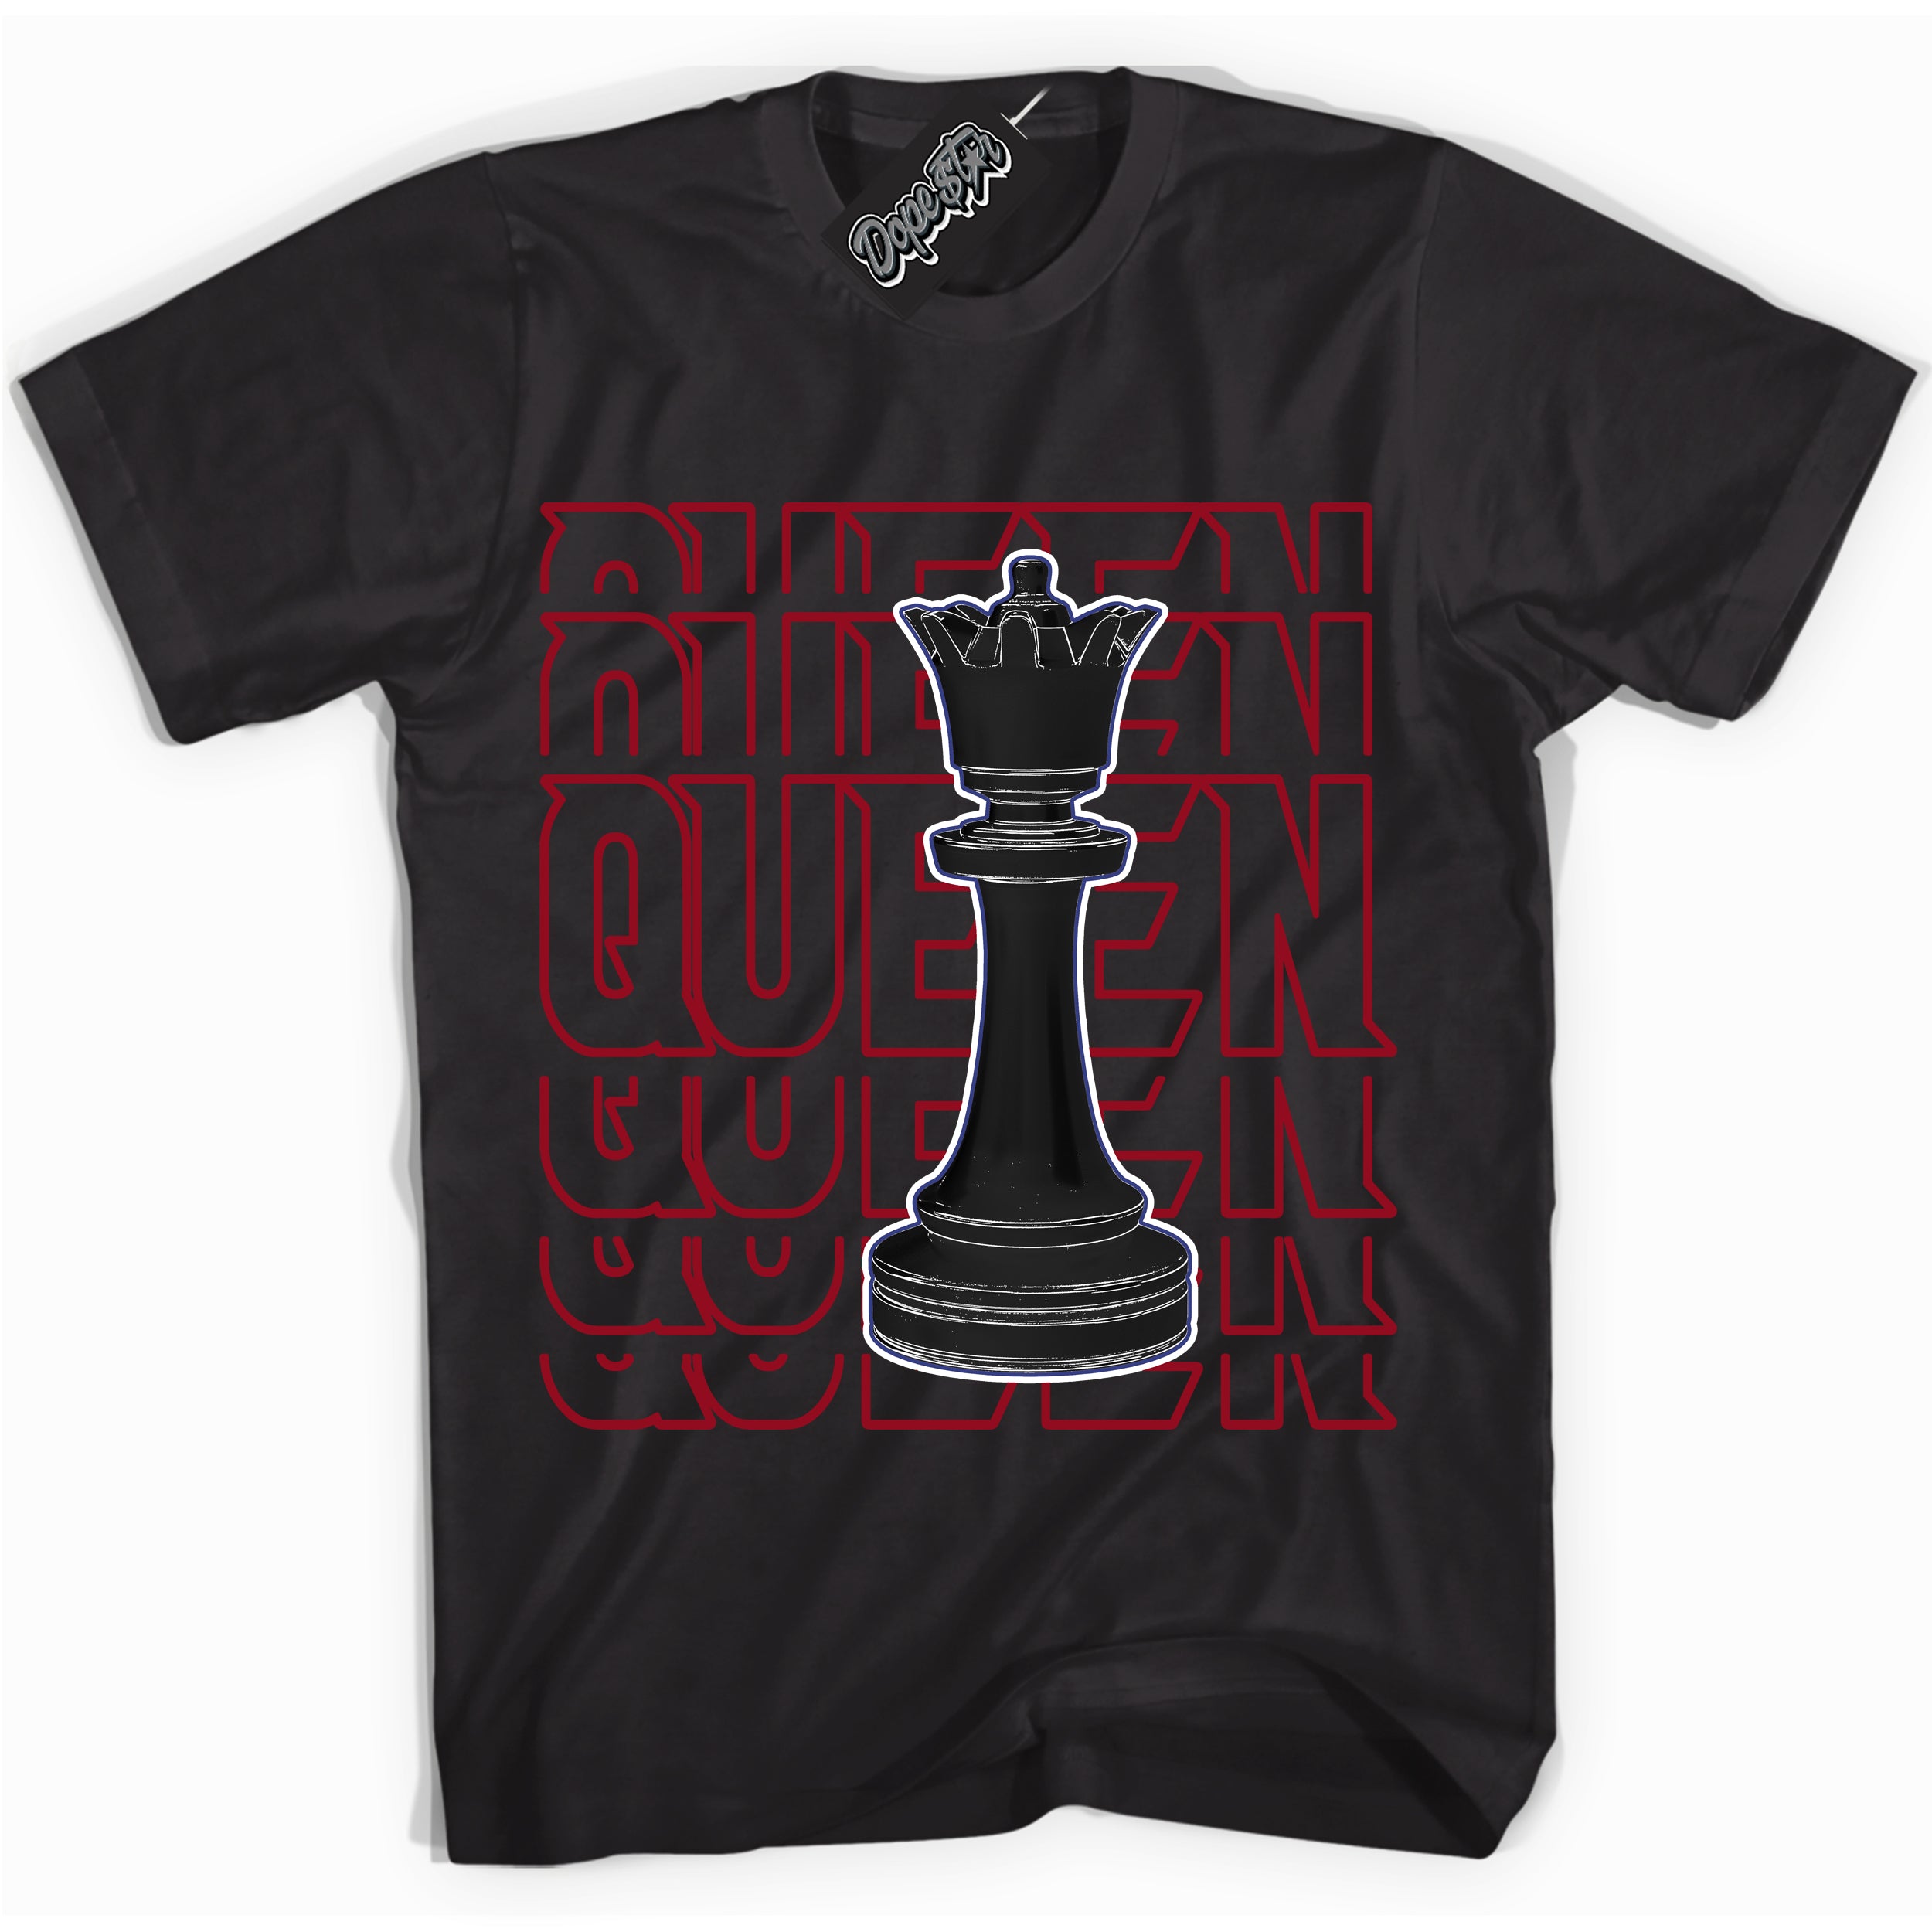 Cool Black Shirt with “ Queen Chess ” design that perfectly matches Playoffs 8s Sneakers.